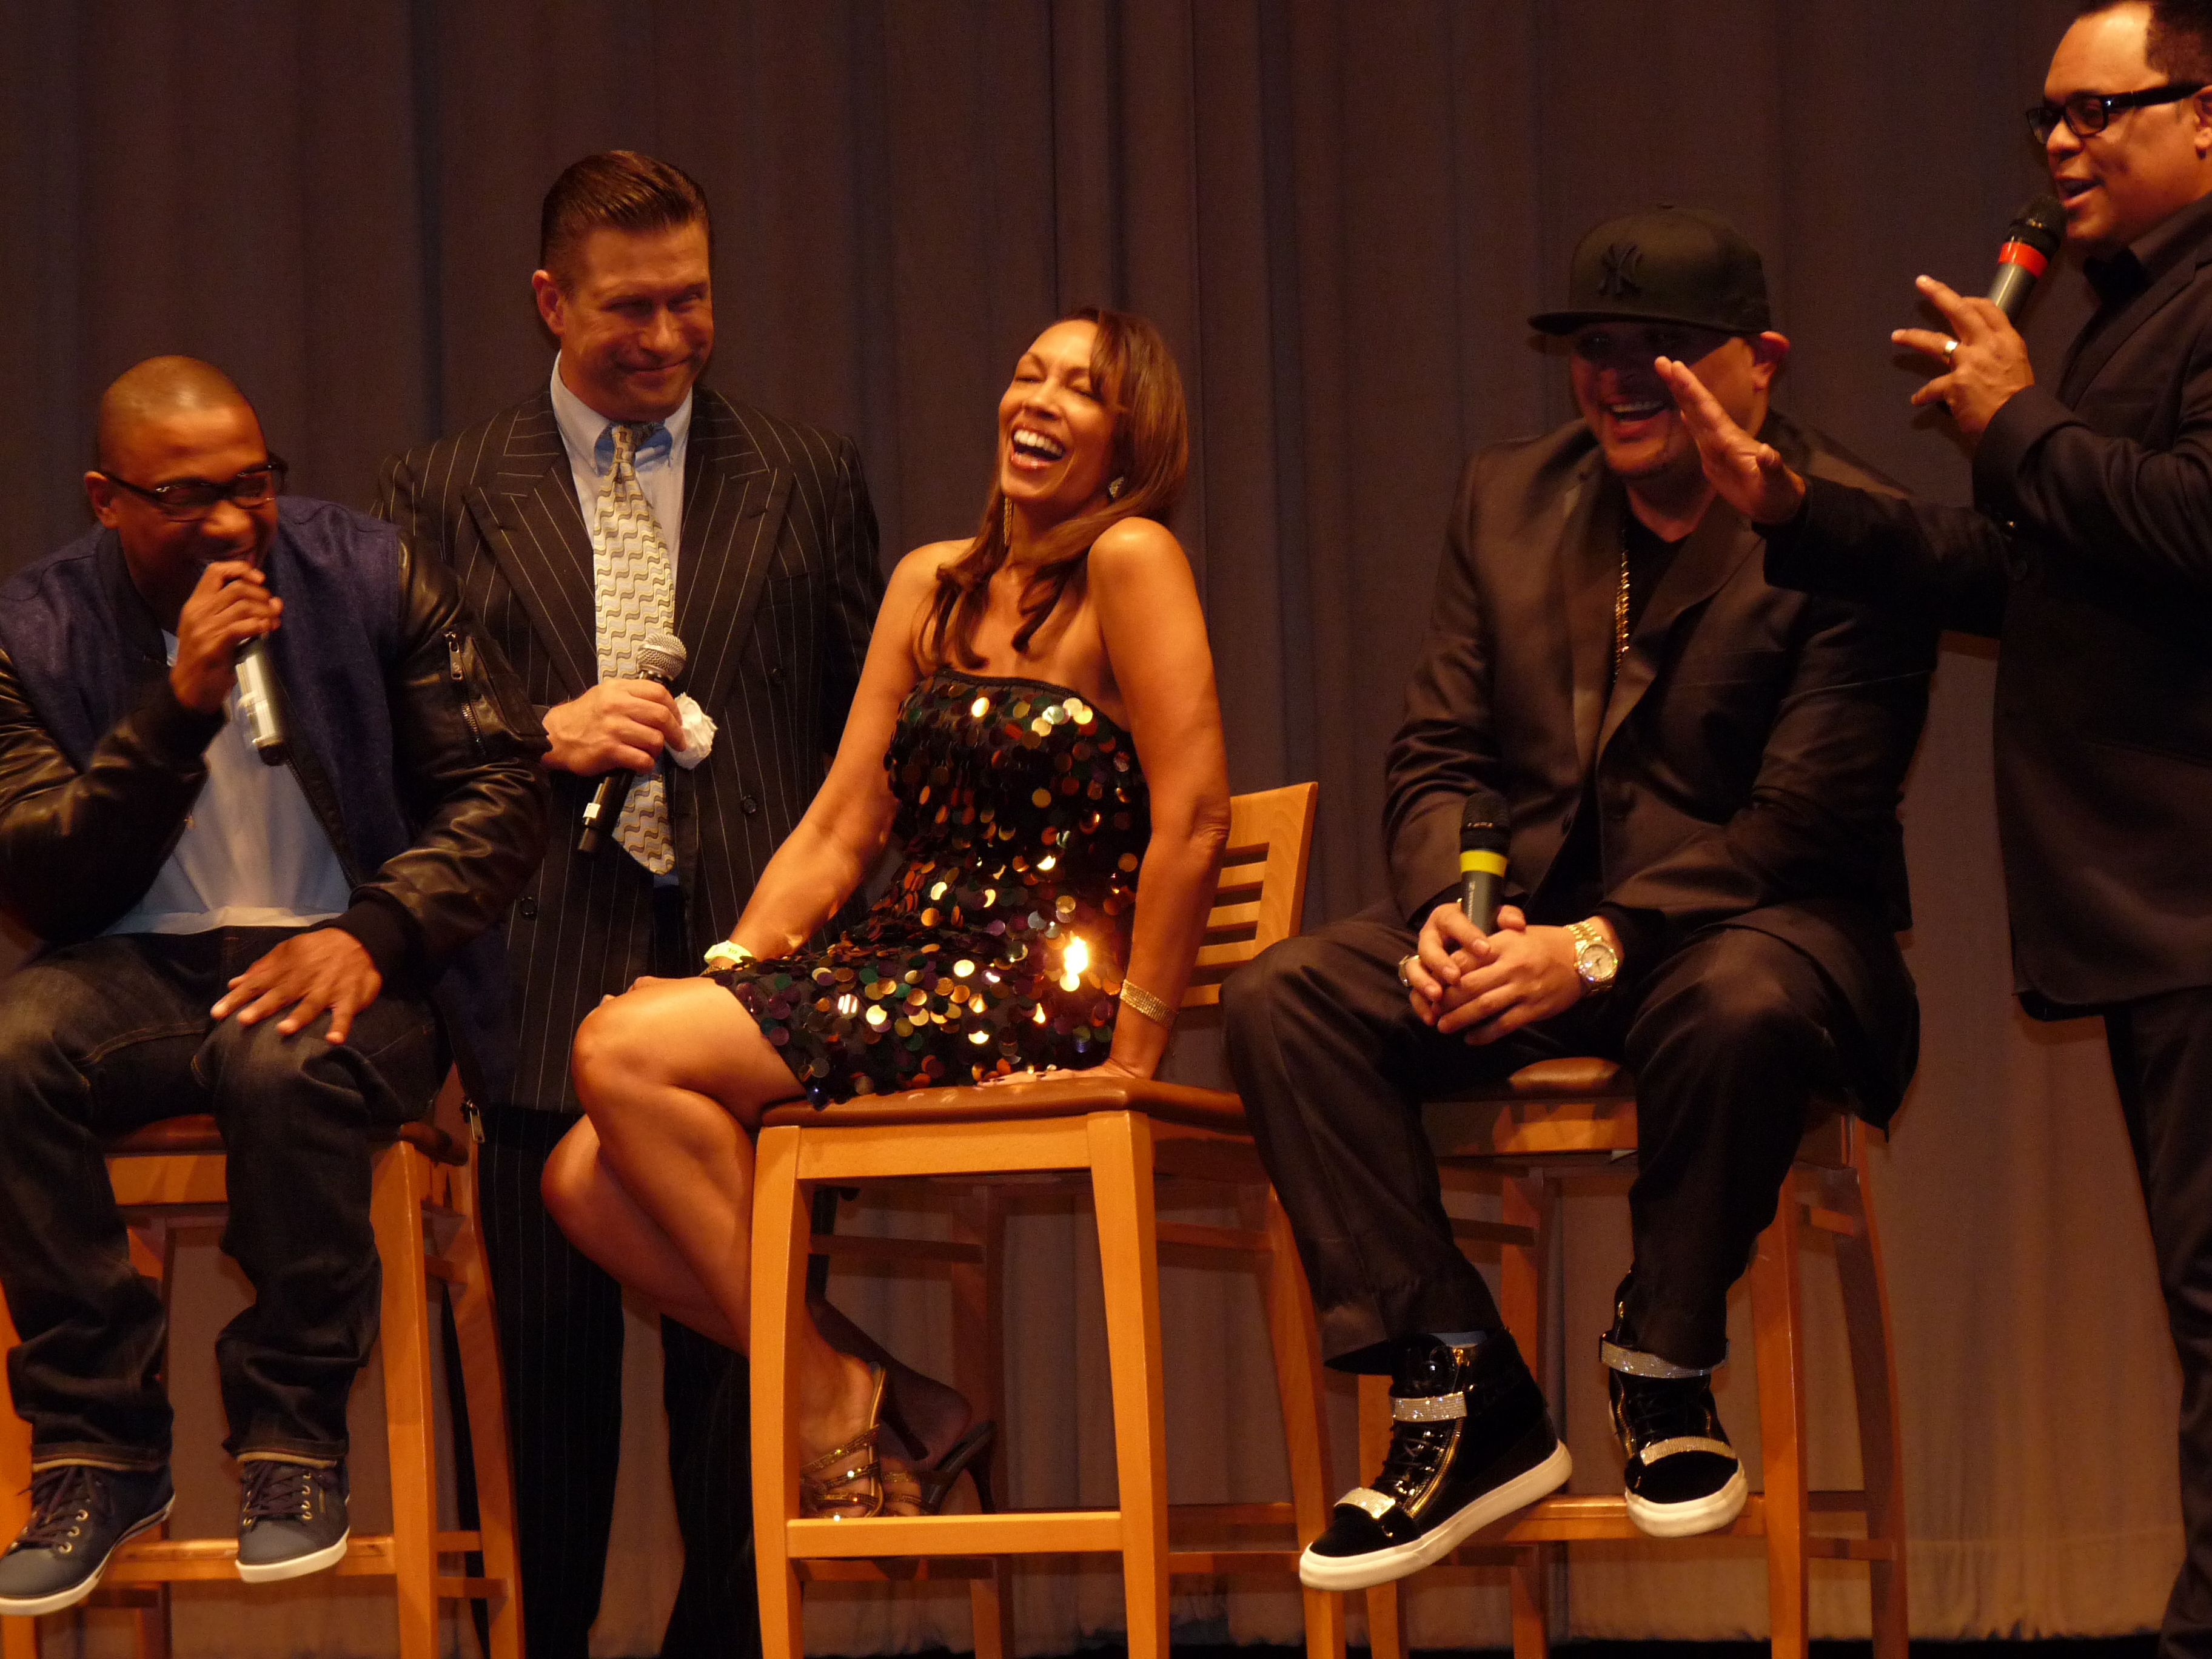 I'm In Love With A Church Girl cast: Ja Rule, Stephen Baldwin, Marjorie Mann, Galley Molina, Israel Houghton